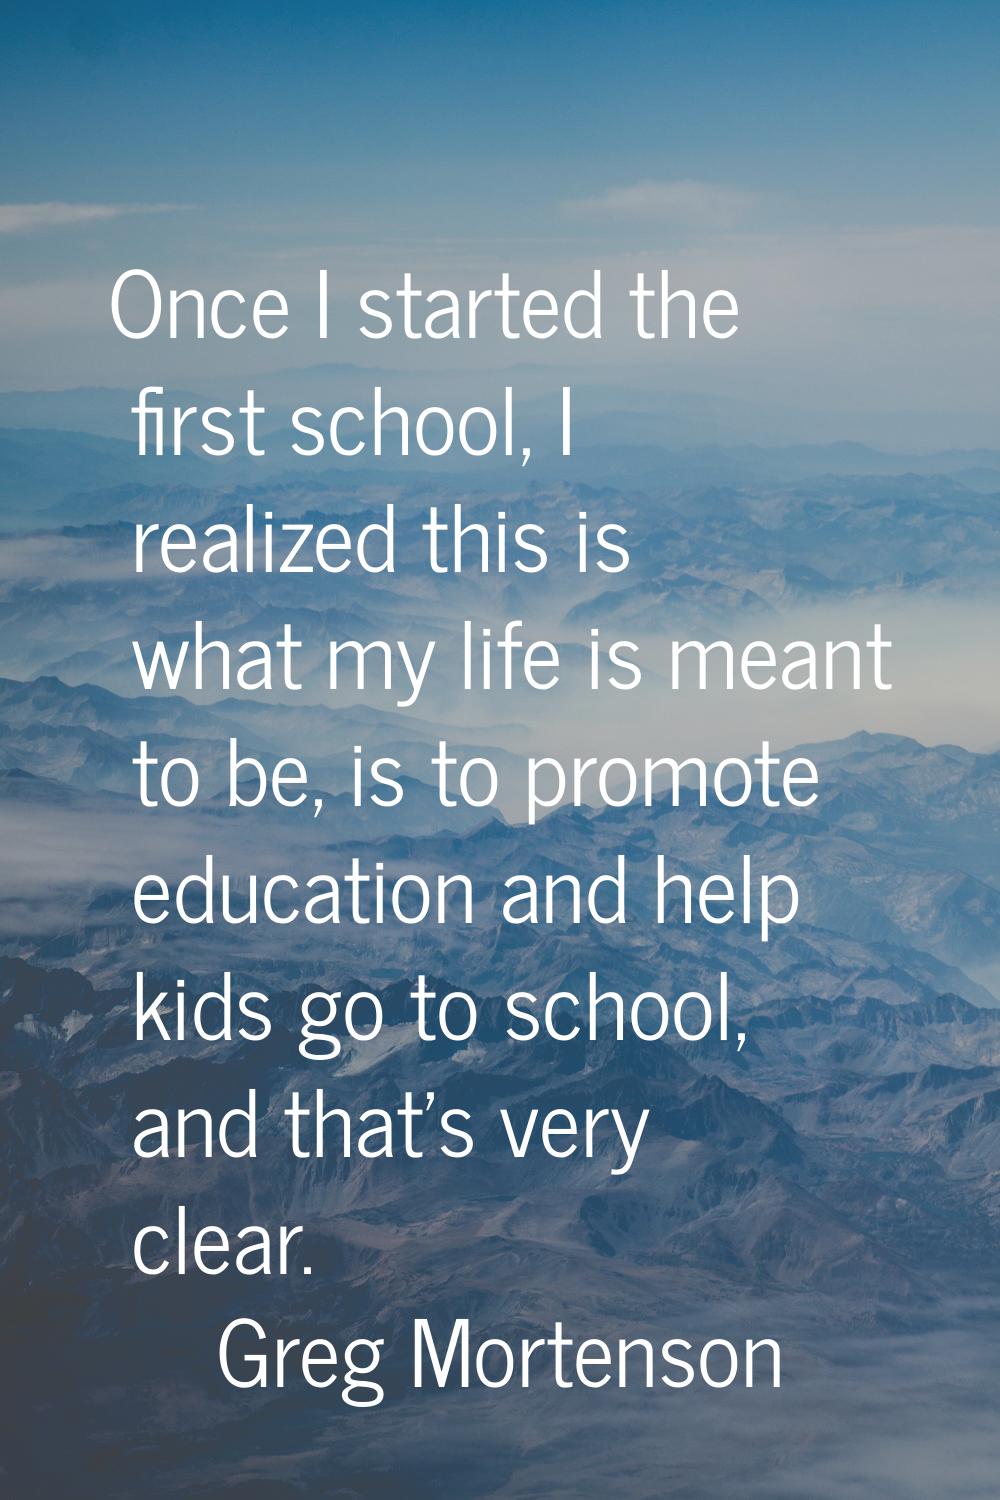 Once I started the first school, I realized this is what my life is meant to be, is to promote educ